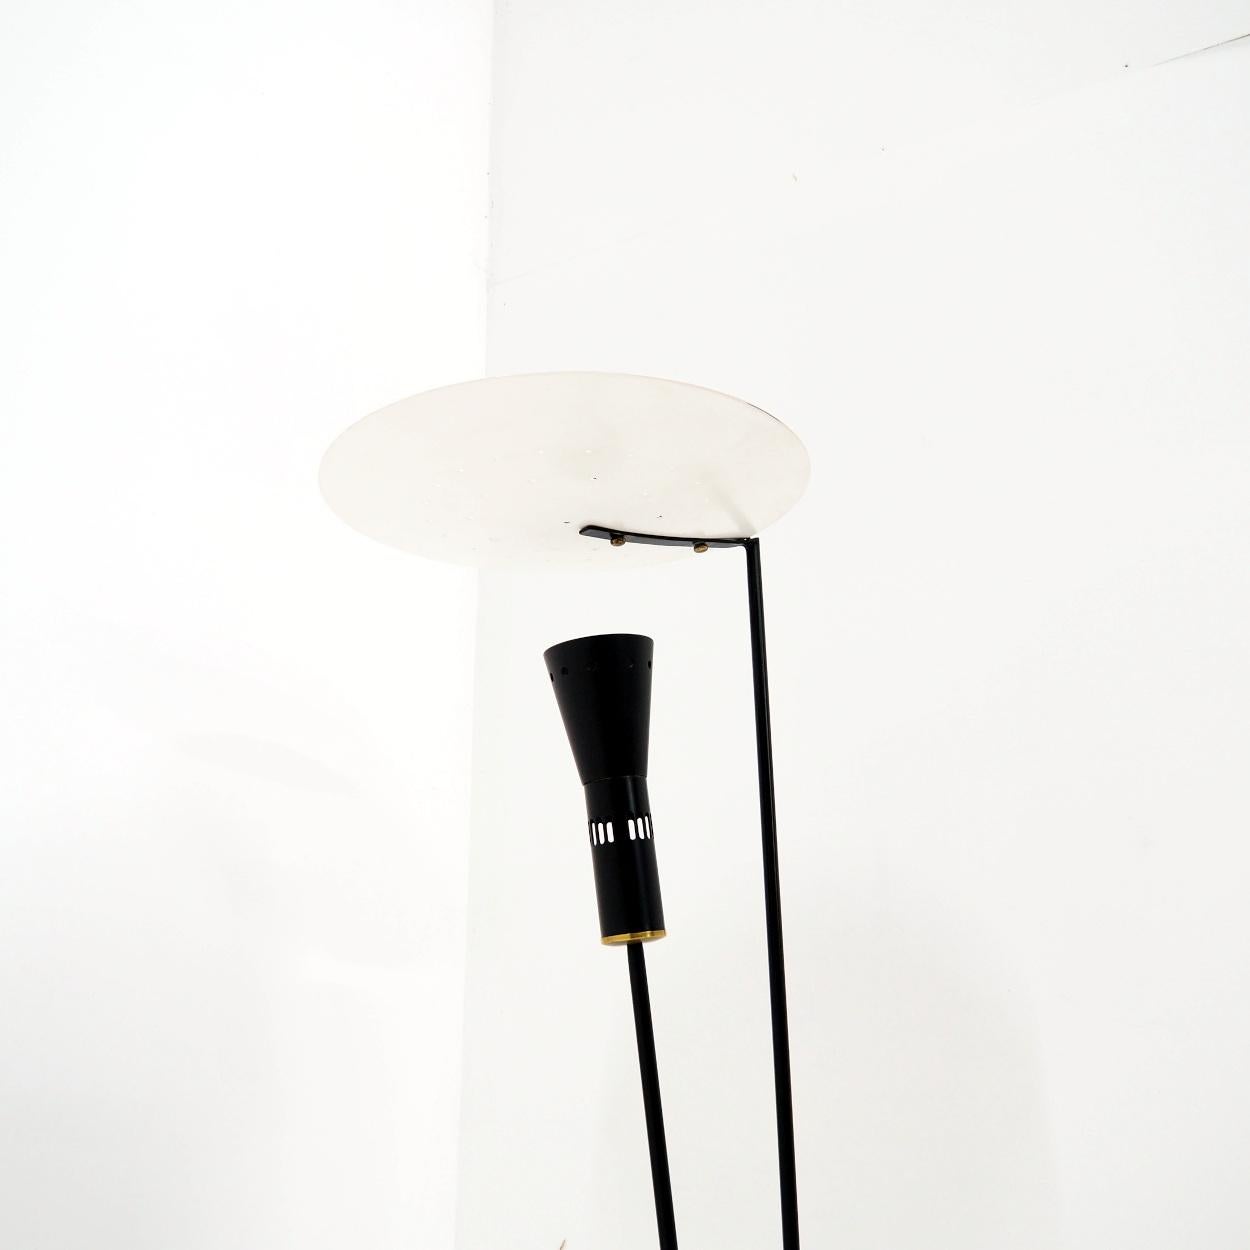 Late 20th Century Floor lamp in the style of the ‘B211’ lamp by Michel Buffet. For Sale